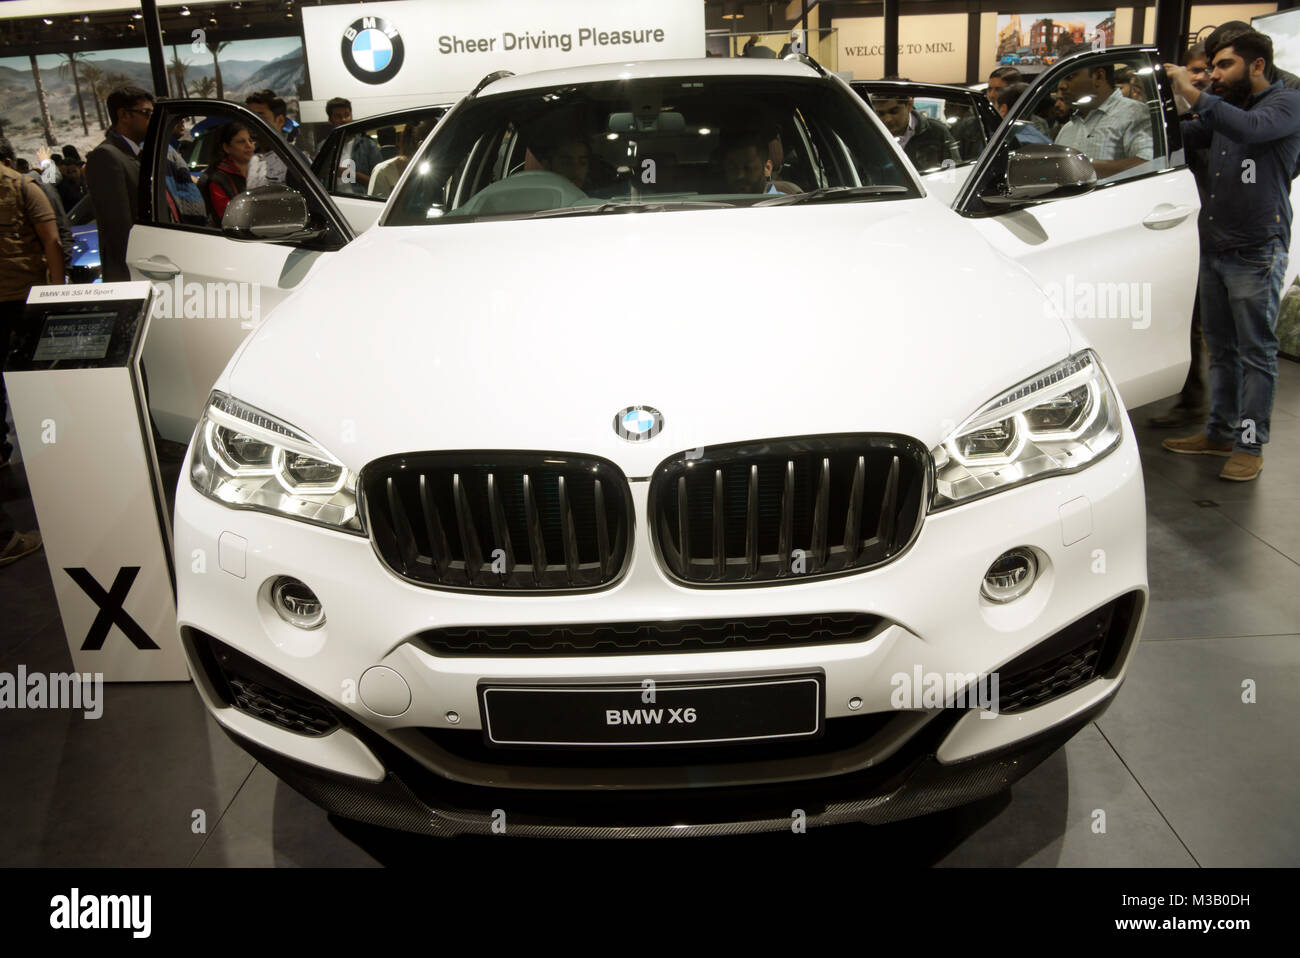 Greater Noida, India. 9th February 2018. A BMW X6 35i M Sport car is displayed at the Auto Expo 2018 at India Expo Mart in Greater Noida, India. The Auto Expo is a biennial event and is being held during 9th to 14th February 2018. Credit: Karunesh Johri/Alamy Live News. Stock Photo